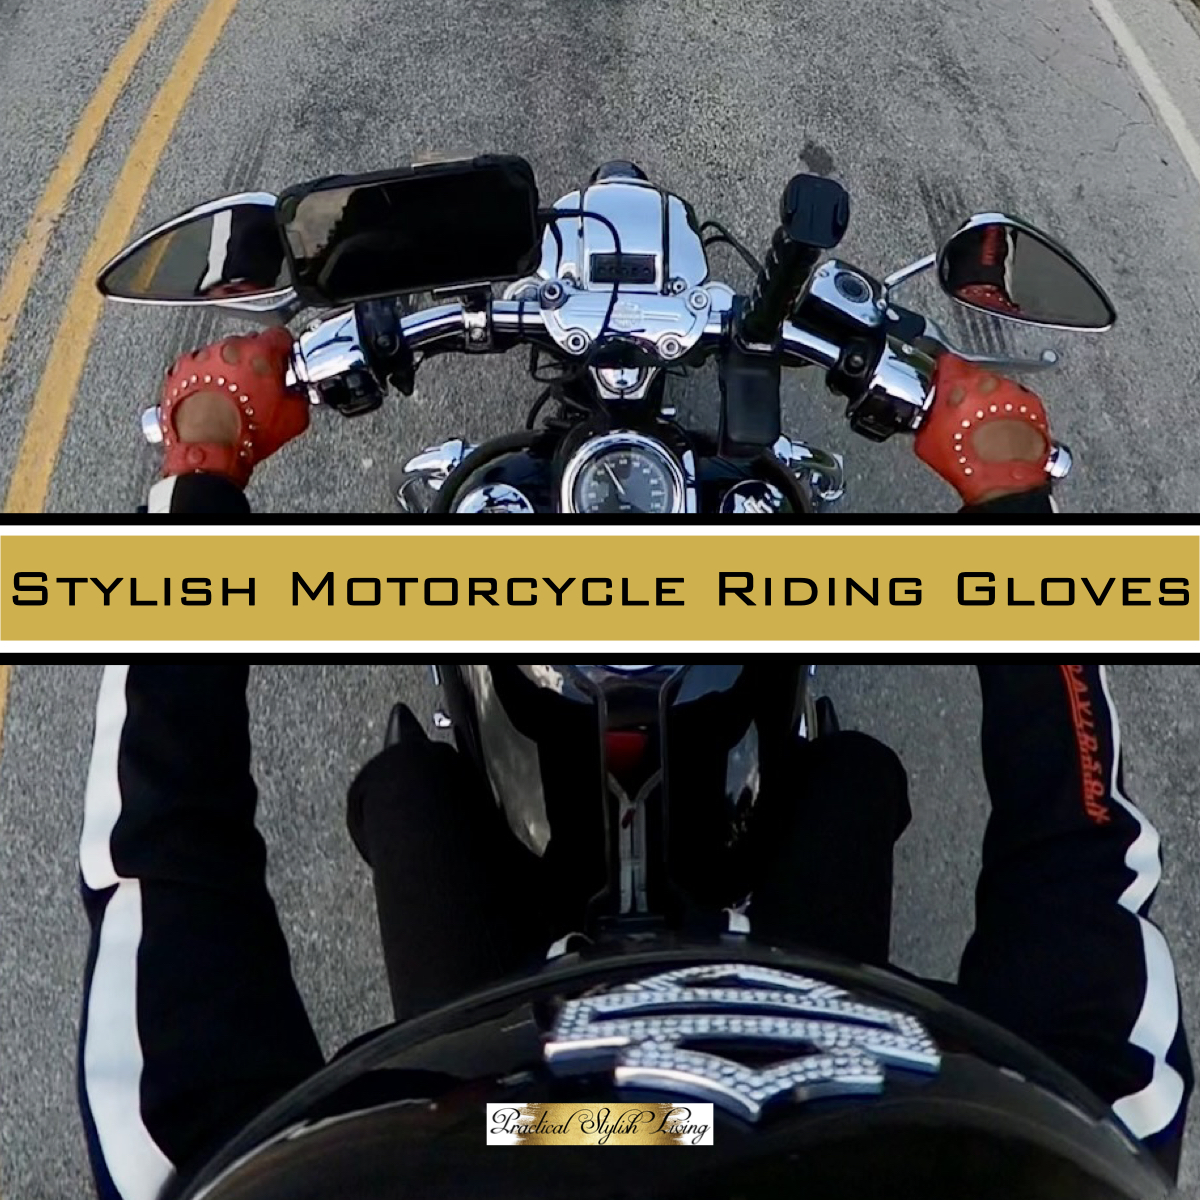 Stylish motorcycle riding glove hack for women